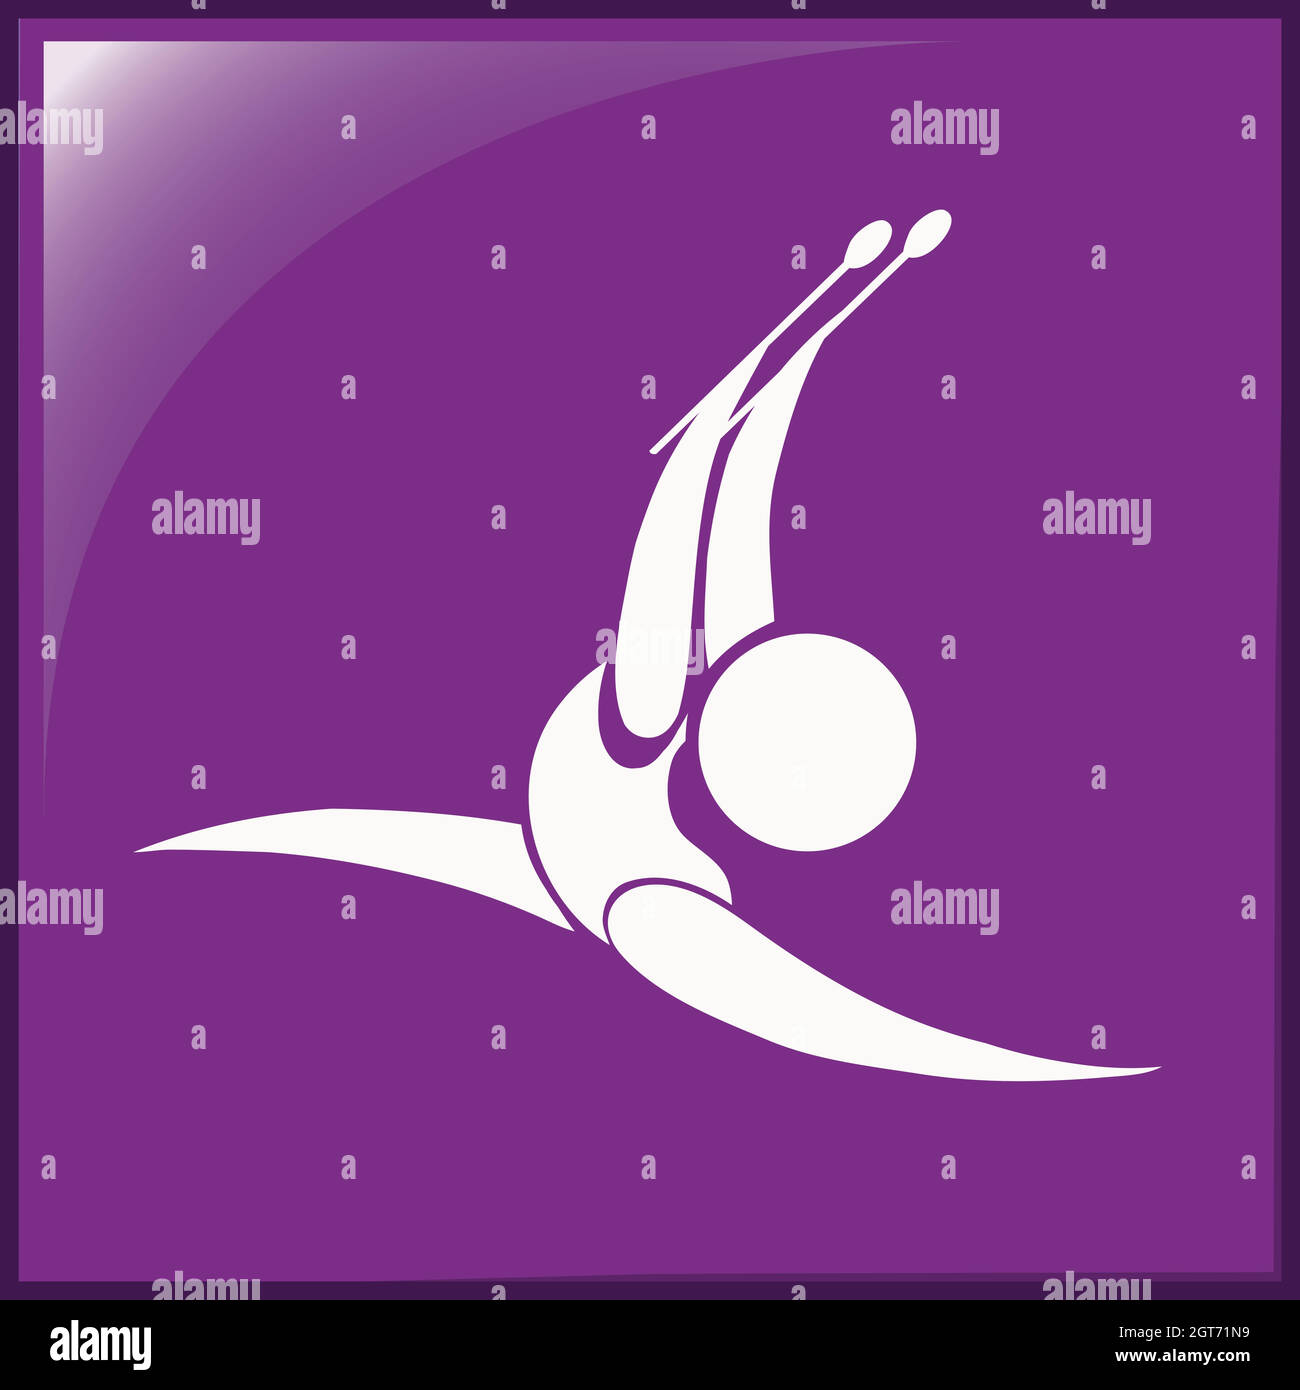 Sport icon for gymnastics with sticks Stock Vector